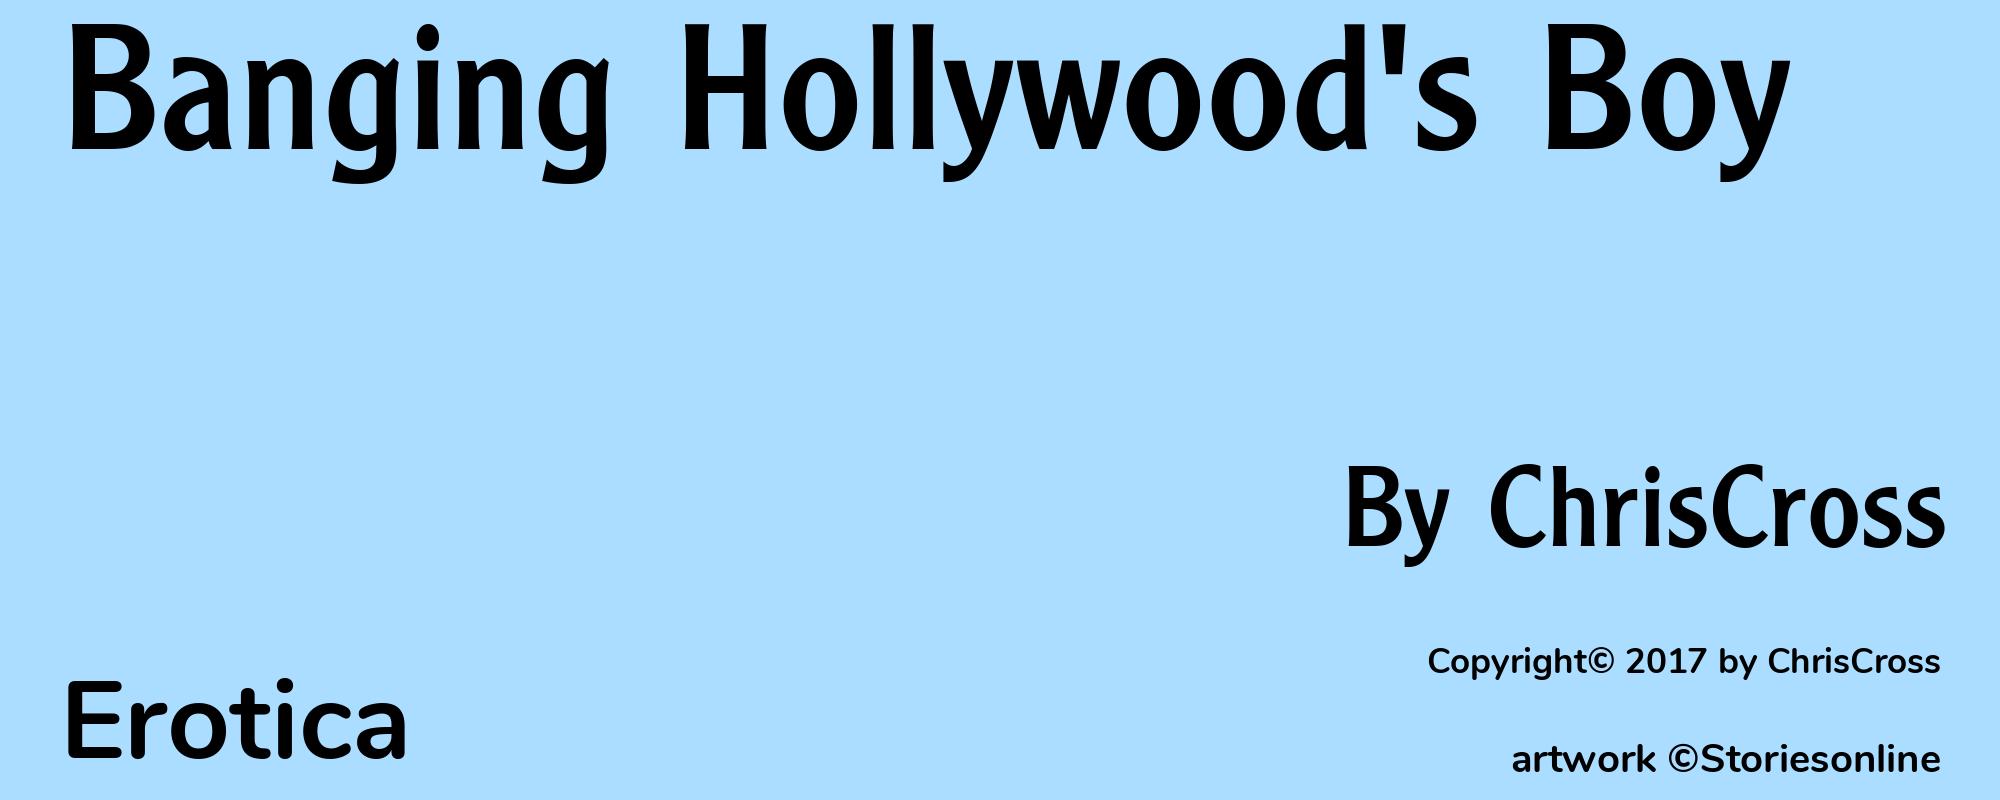 Banging Hollywood's Boy - Cover